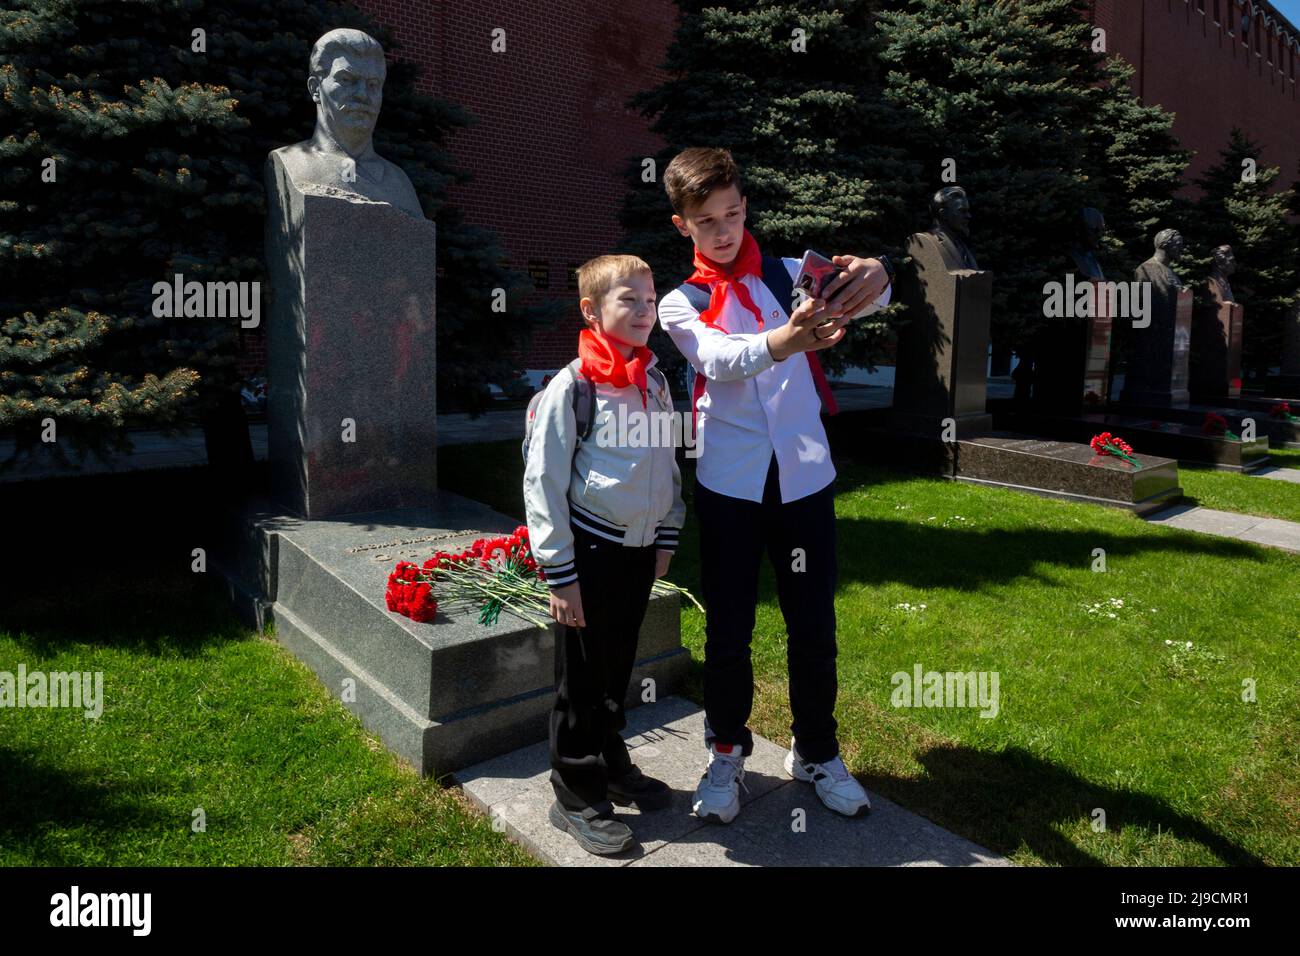 Moscow, Russia. 22nd May, 2022. Young pioneers take a selfie on a background of the tomb of Soviet leader Josef Stalin during a pioneer induction ceremony in Moscow's Red Square to celebrate joining the Pioneers organization and 100th anniversary of the All-Union Pioneer Organization, in Moscow, Russia. Nikolay Vinokurov/Alamy Live News Stock Photo